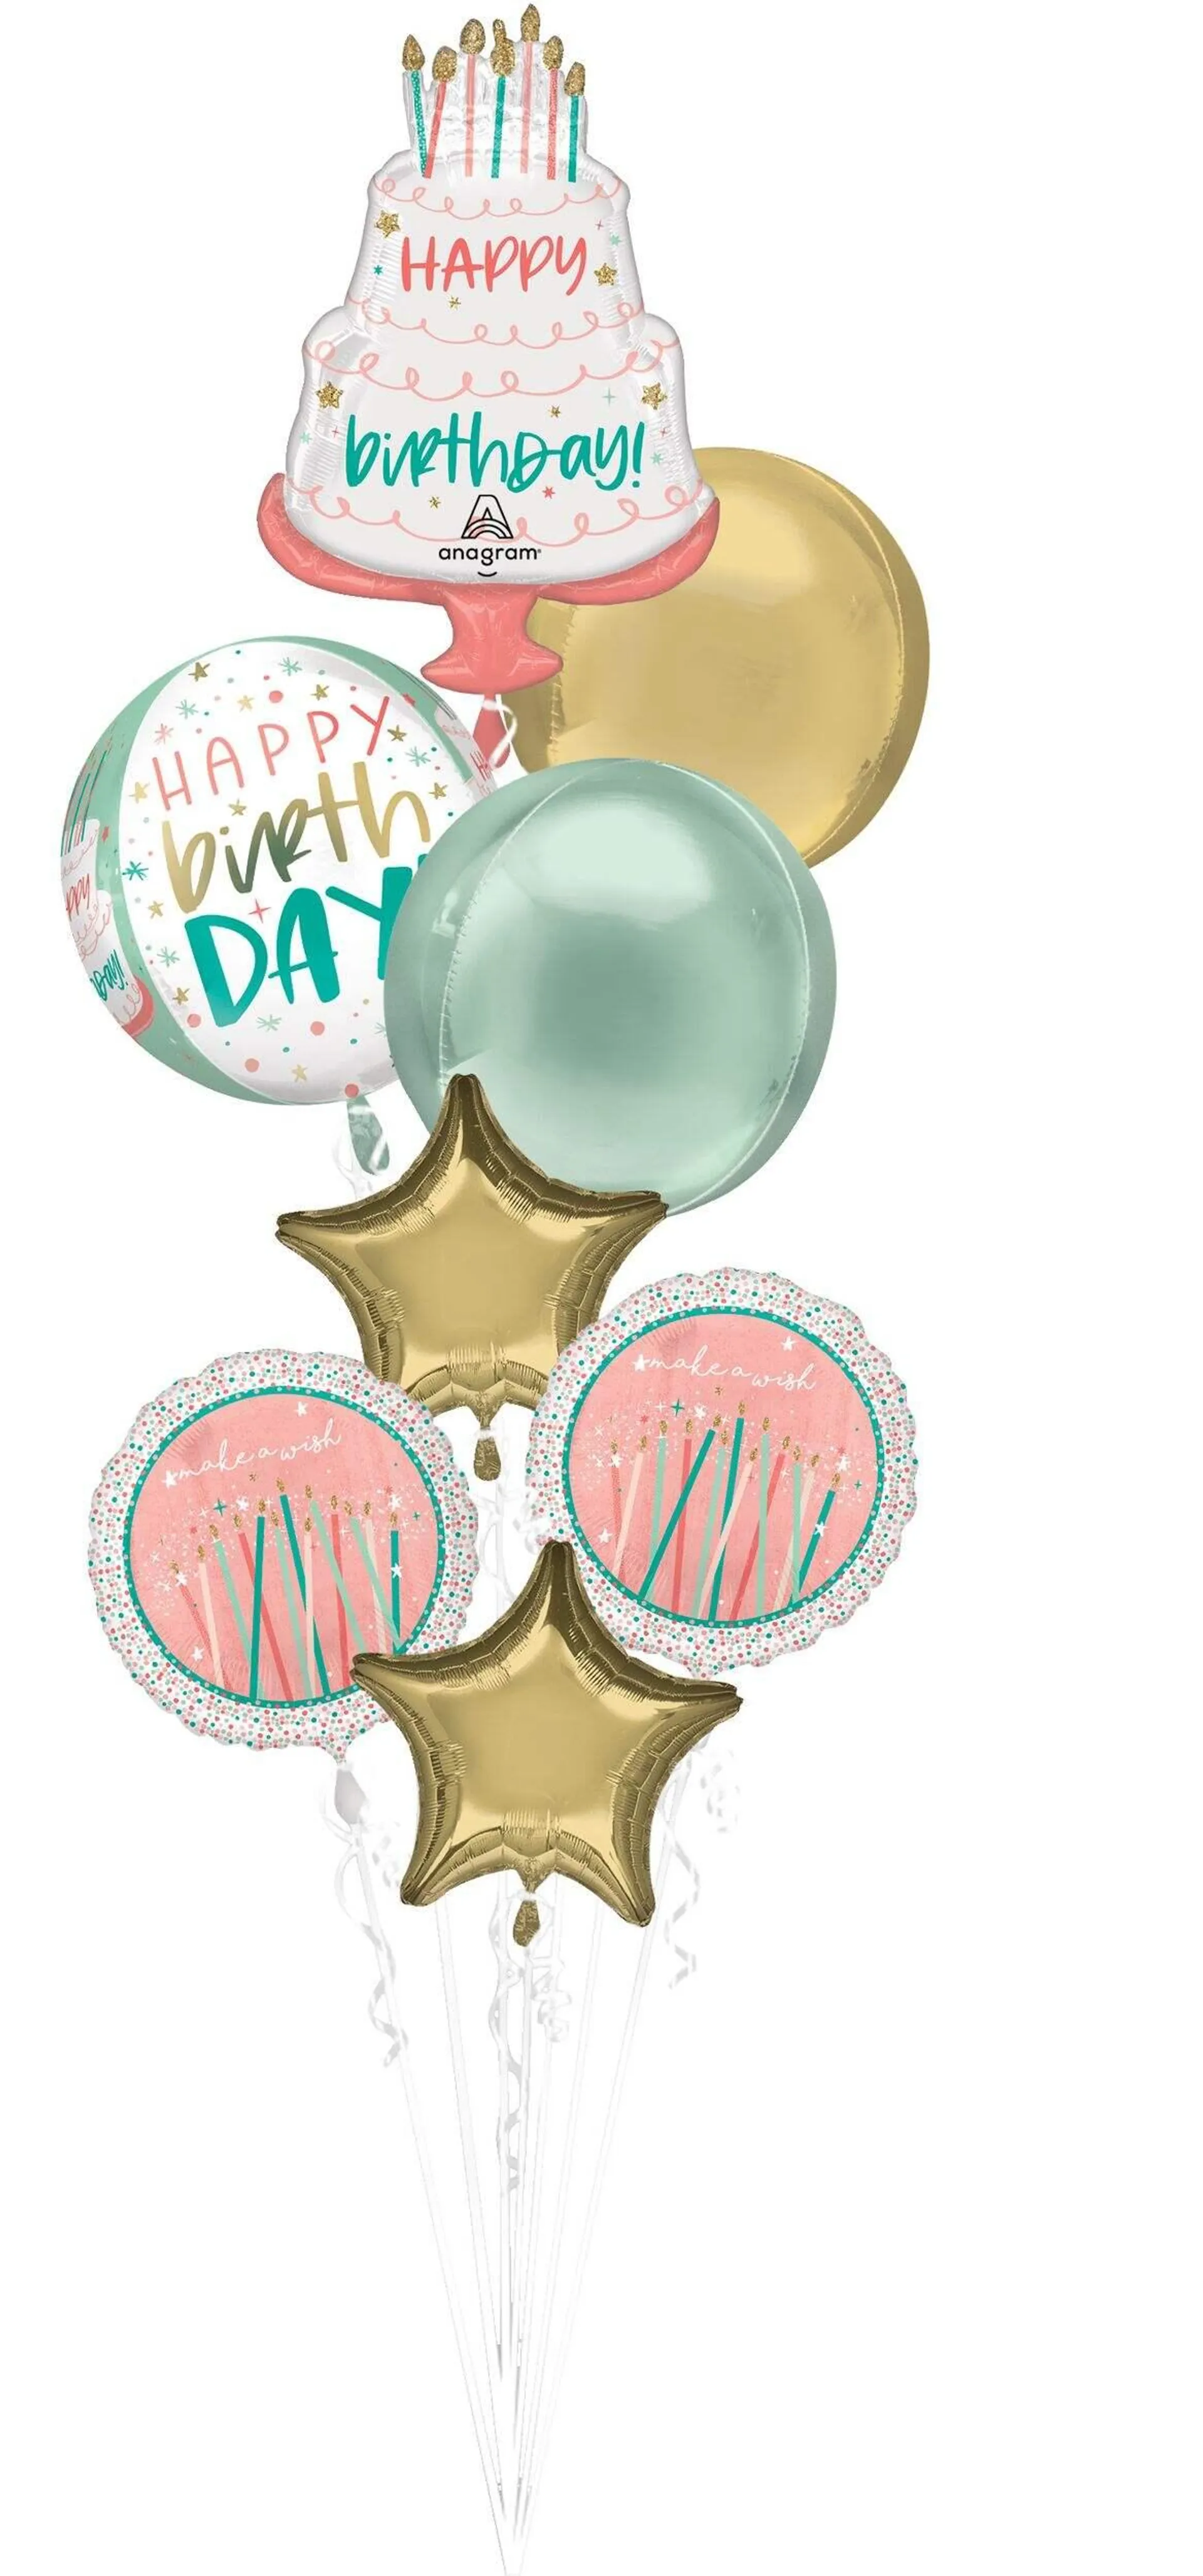 Happy Cake Day "Happy Birthday" Star/Orbz Satin Foil Balloon Bouquet, Pink/Blue, 8-pk, Helium Inflation & Ribbon Included for Birthday Party